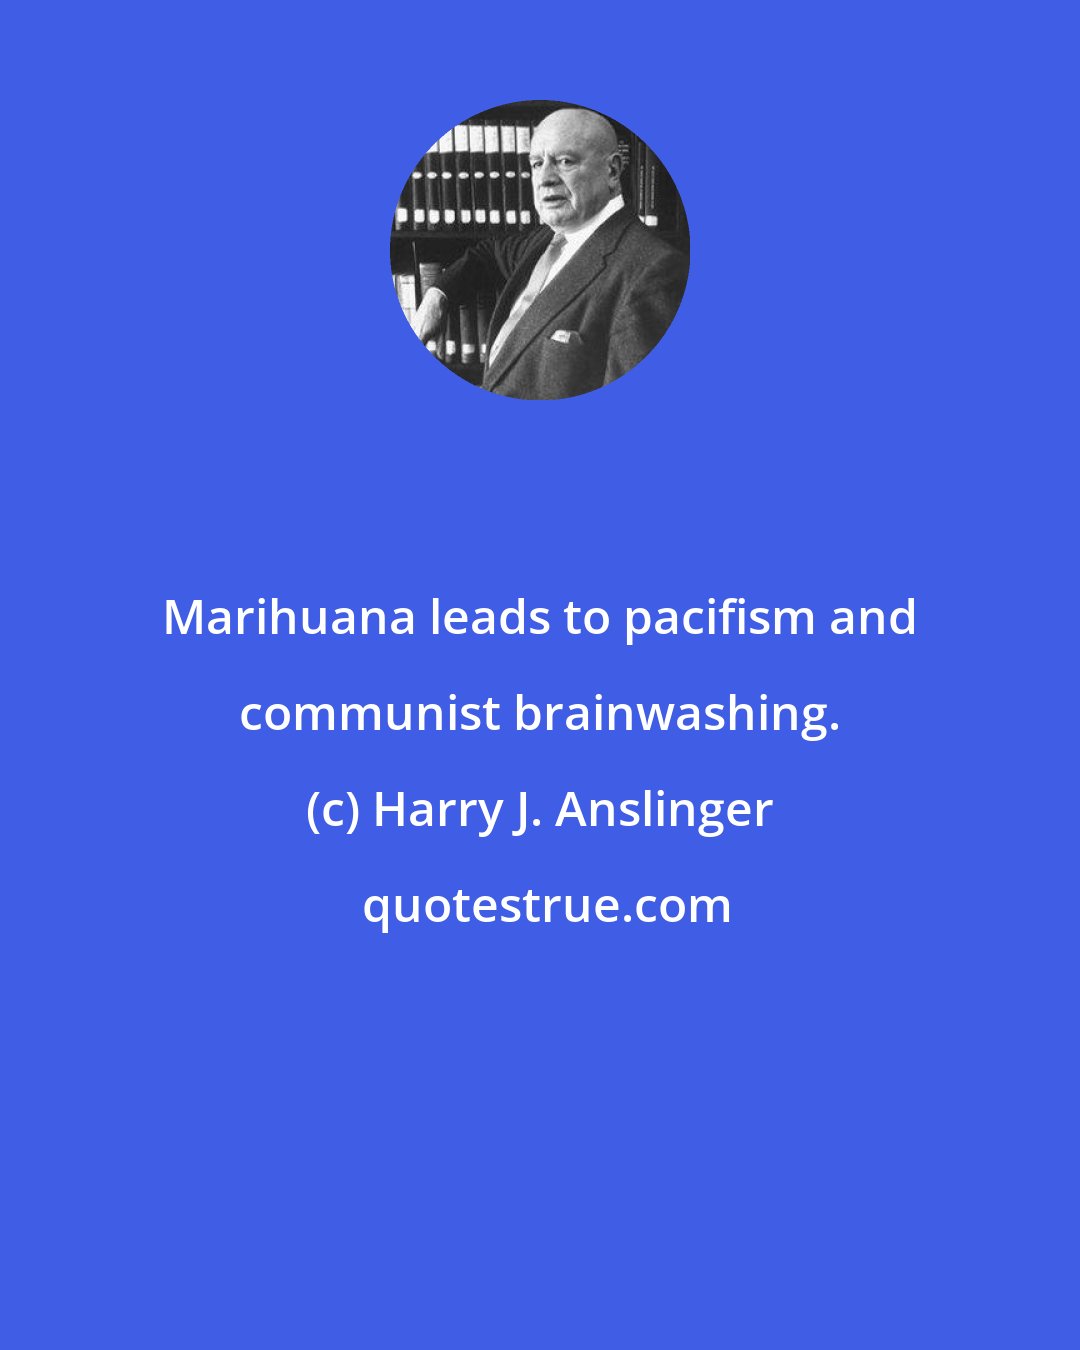 Harry J. Anslinger: Marihuana leads to pacifism and communist brainwashing.